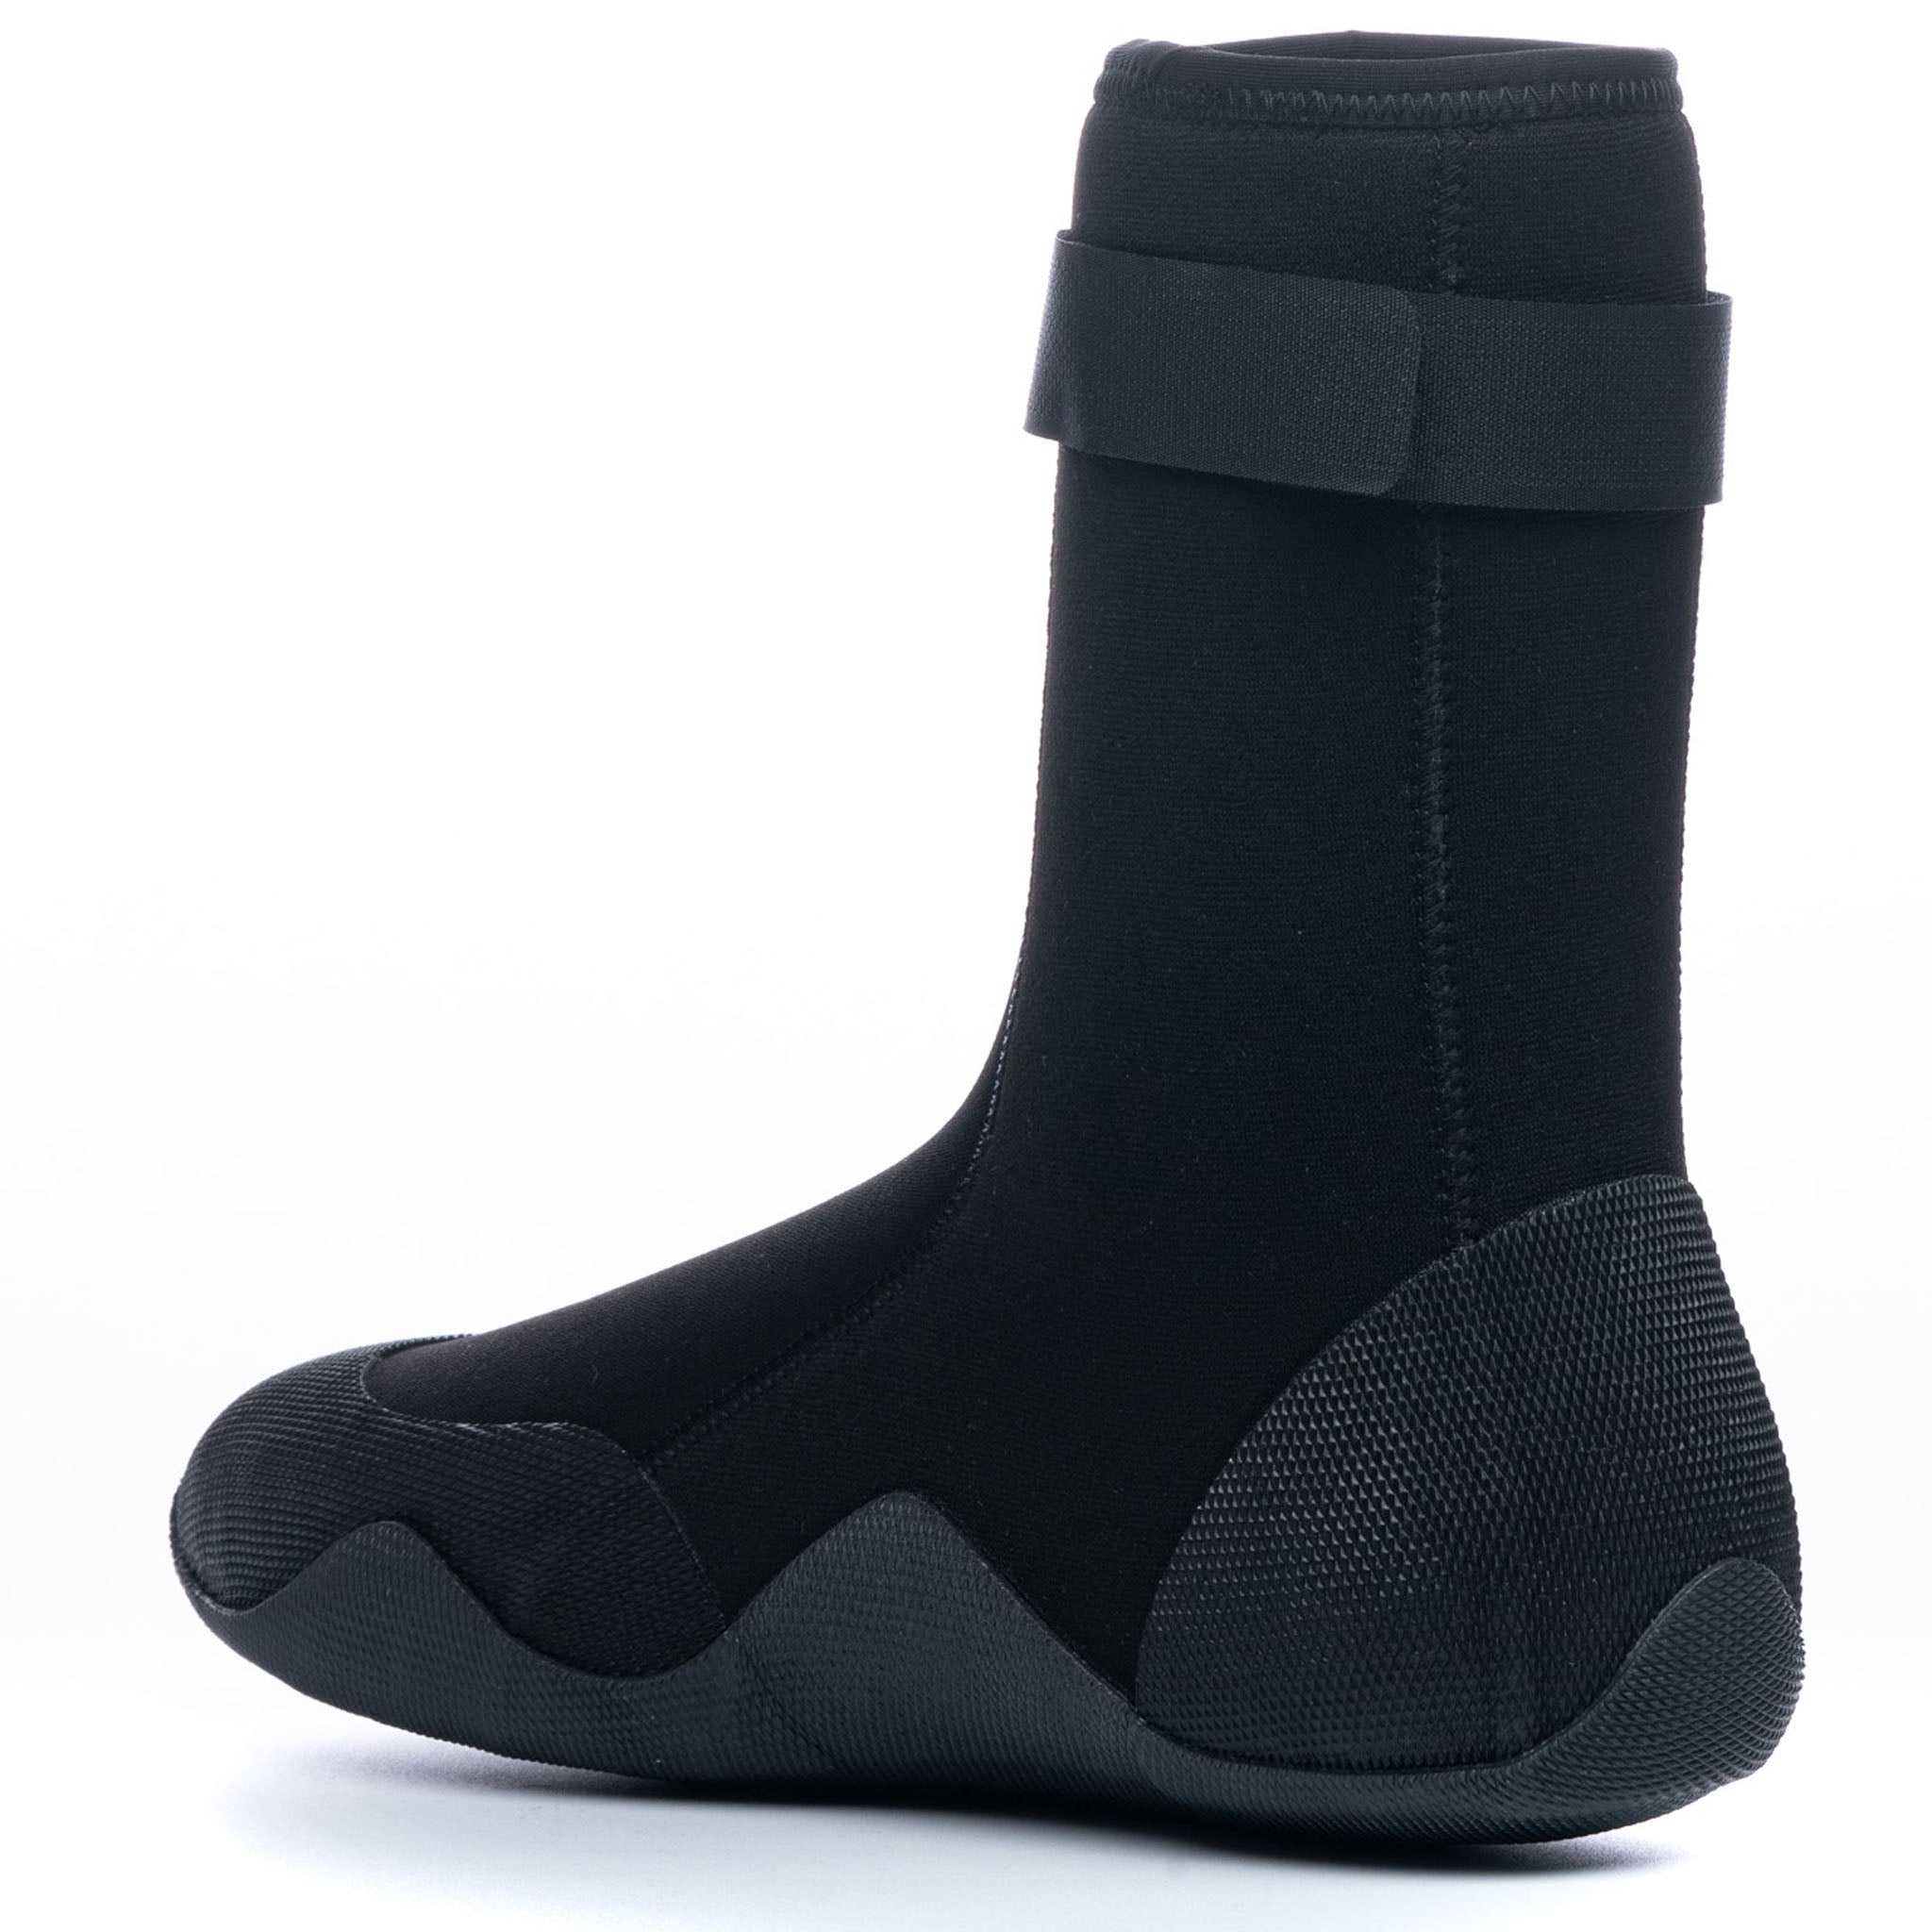 C-Skins Legend 6mm Poly Pro Thermal Wetsuit Boots profile